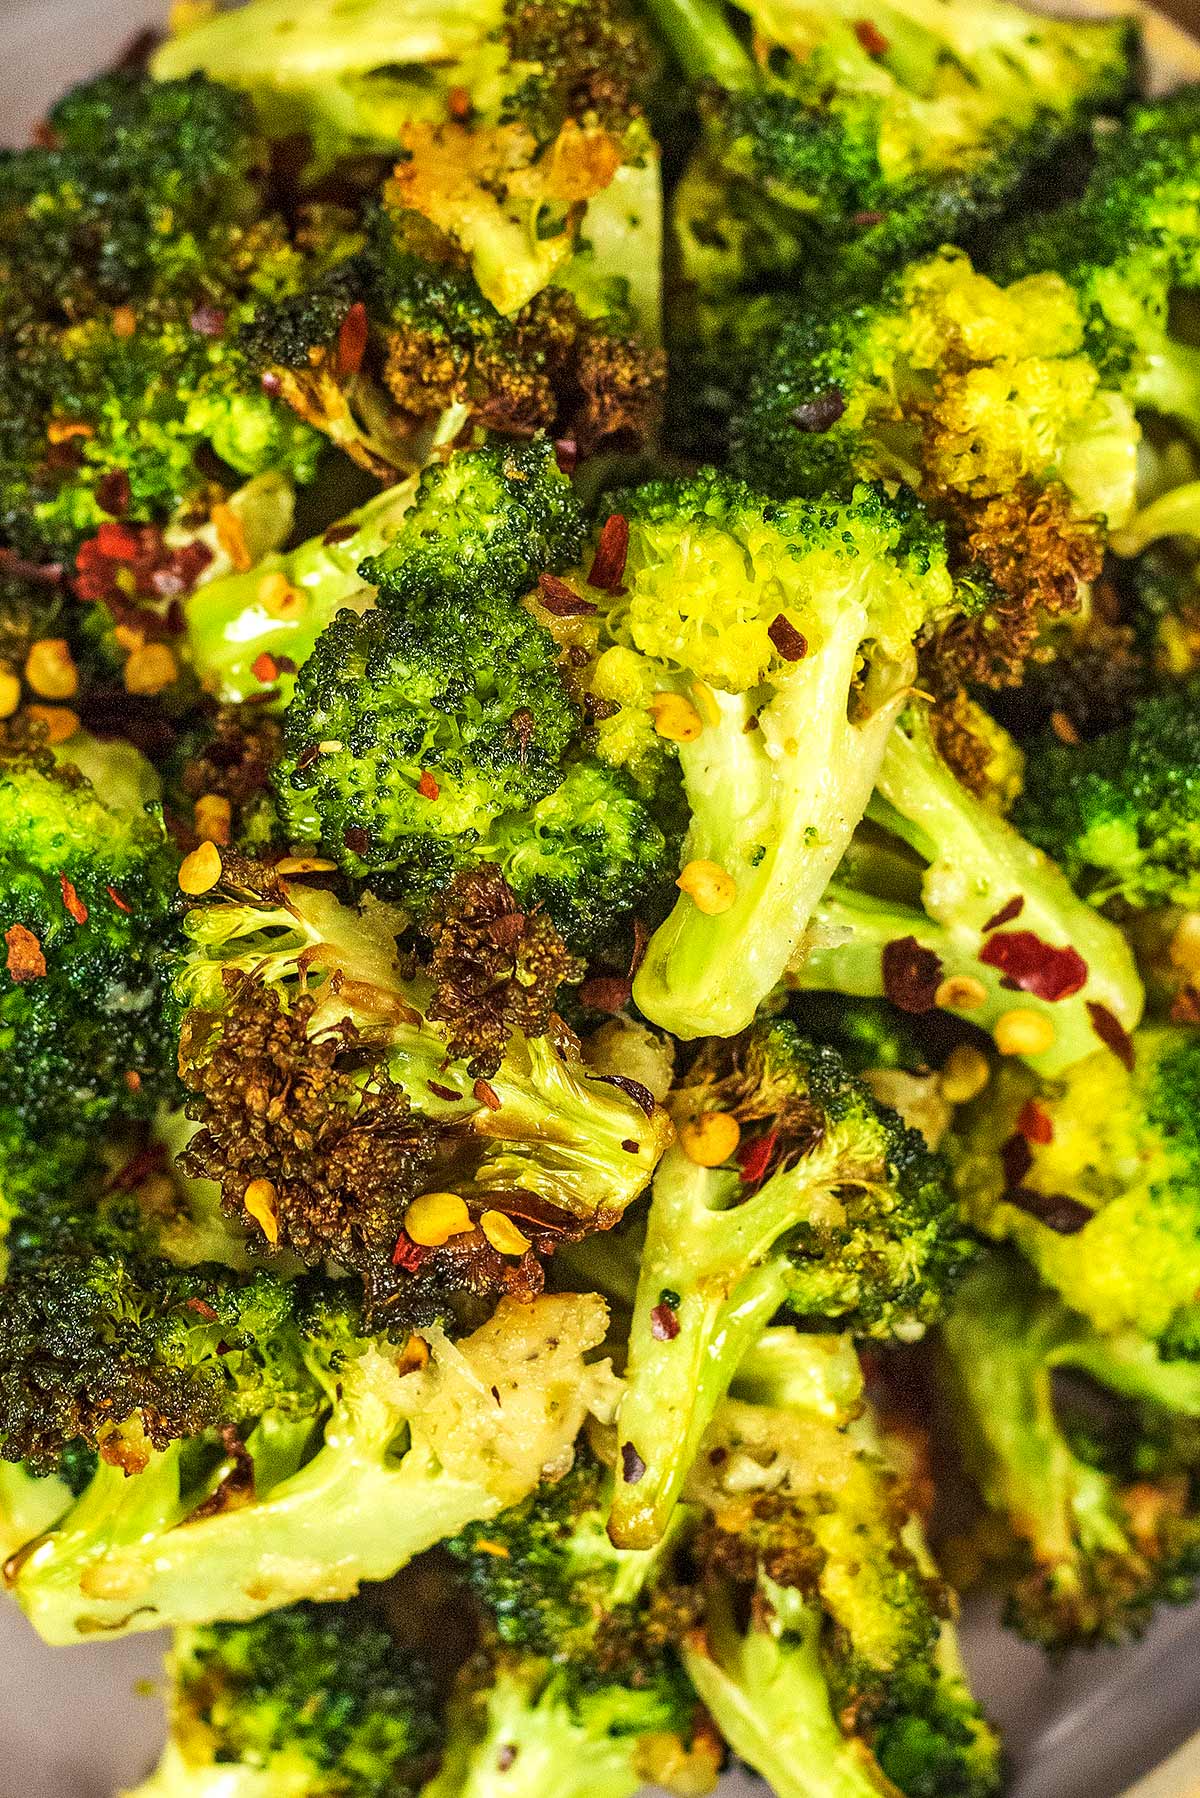 Cooked broccoli florets with chilli flakes sprinkled over them.